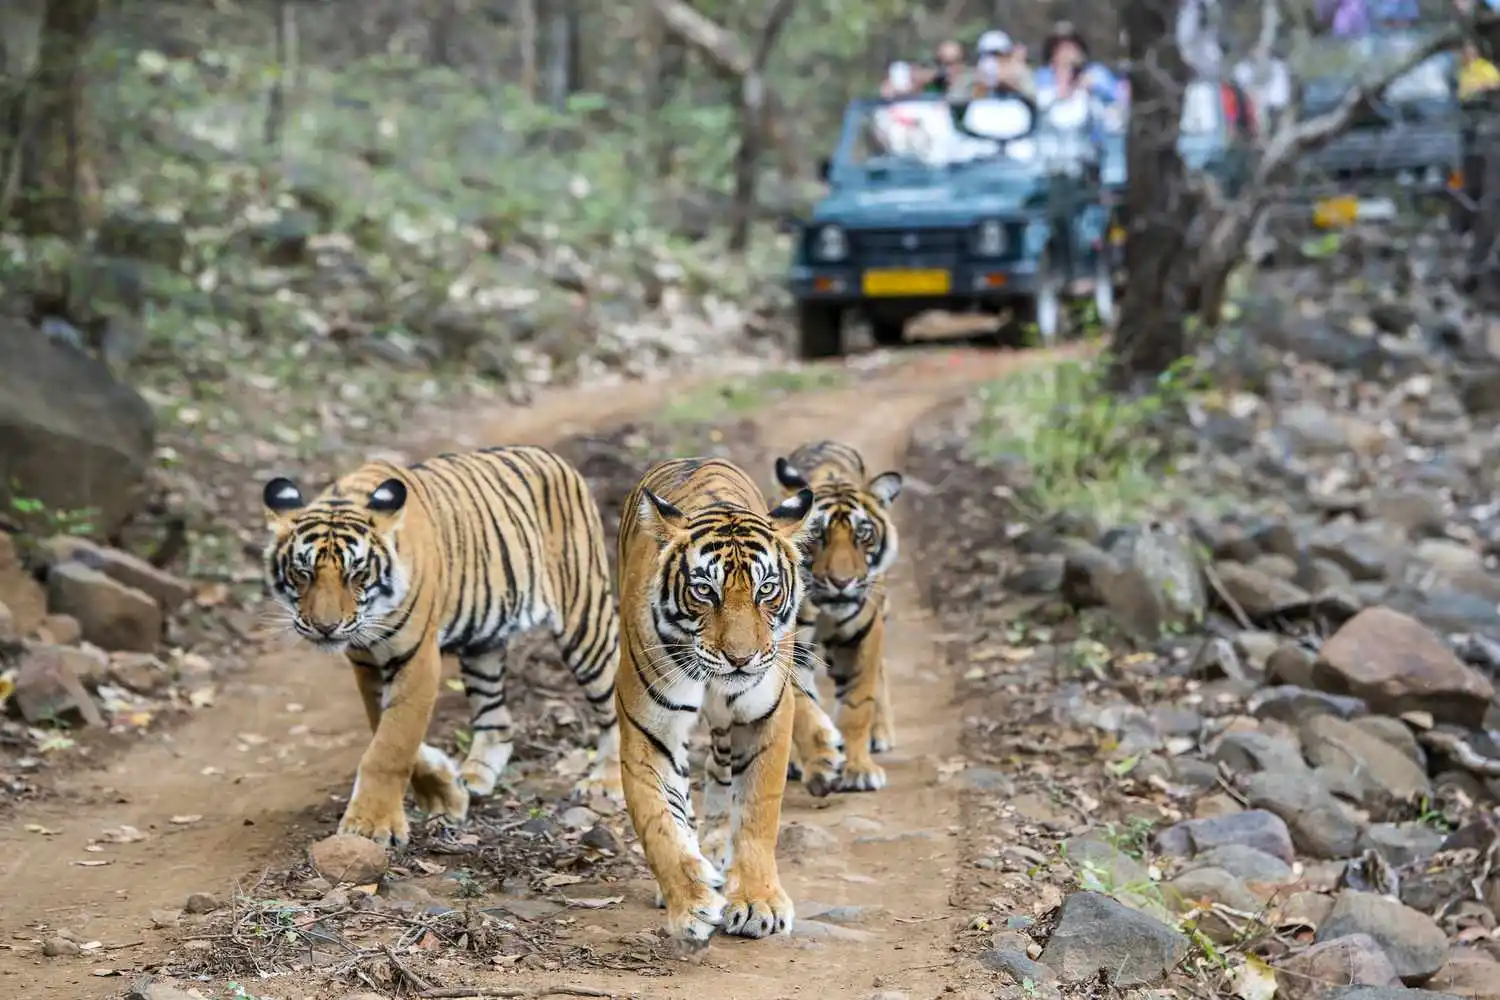 Tigers of Ranthambore National Park